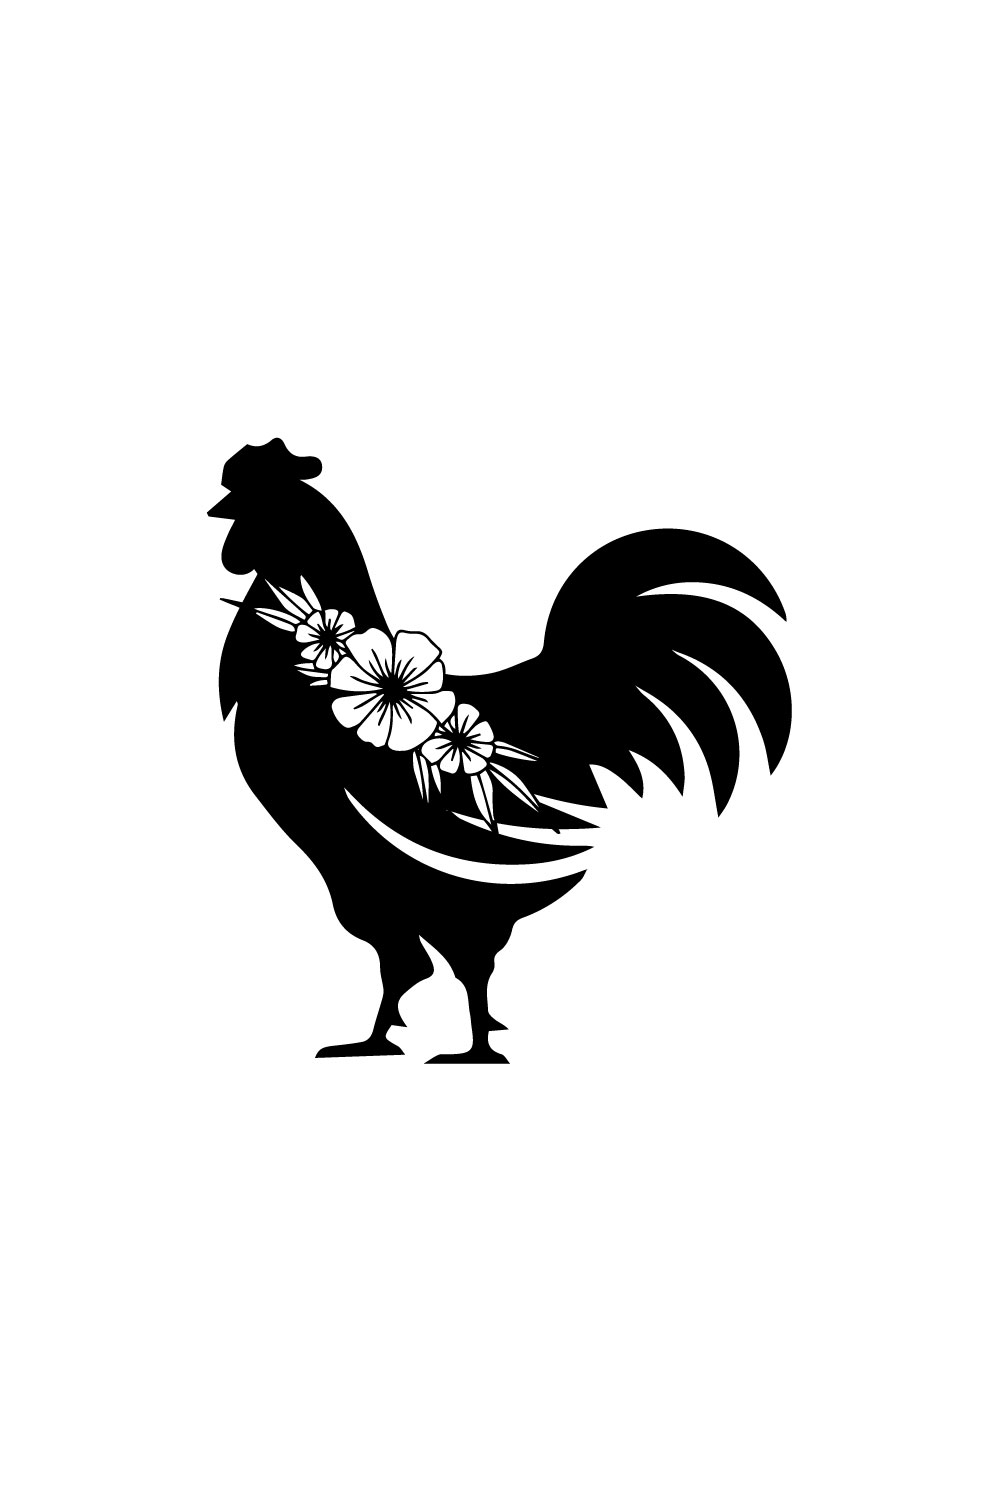 Free rooster logo pinterest preview image.